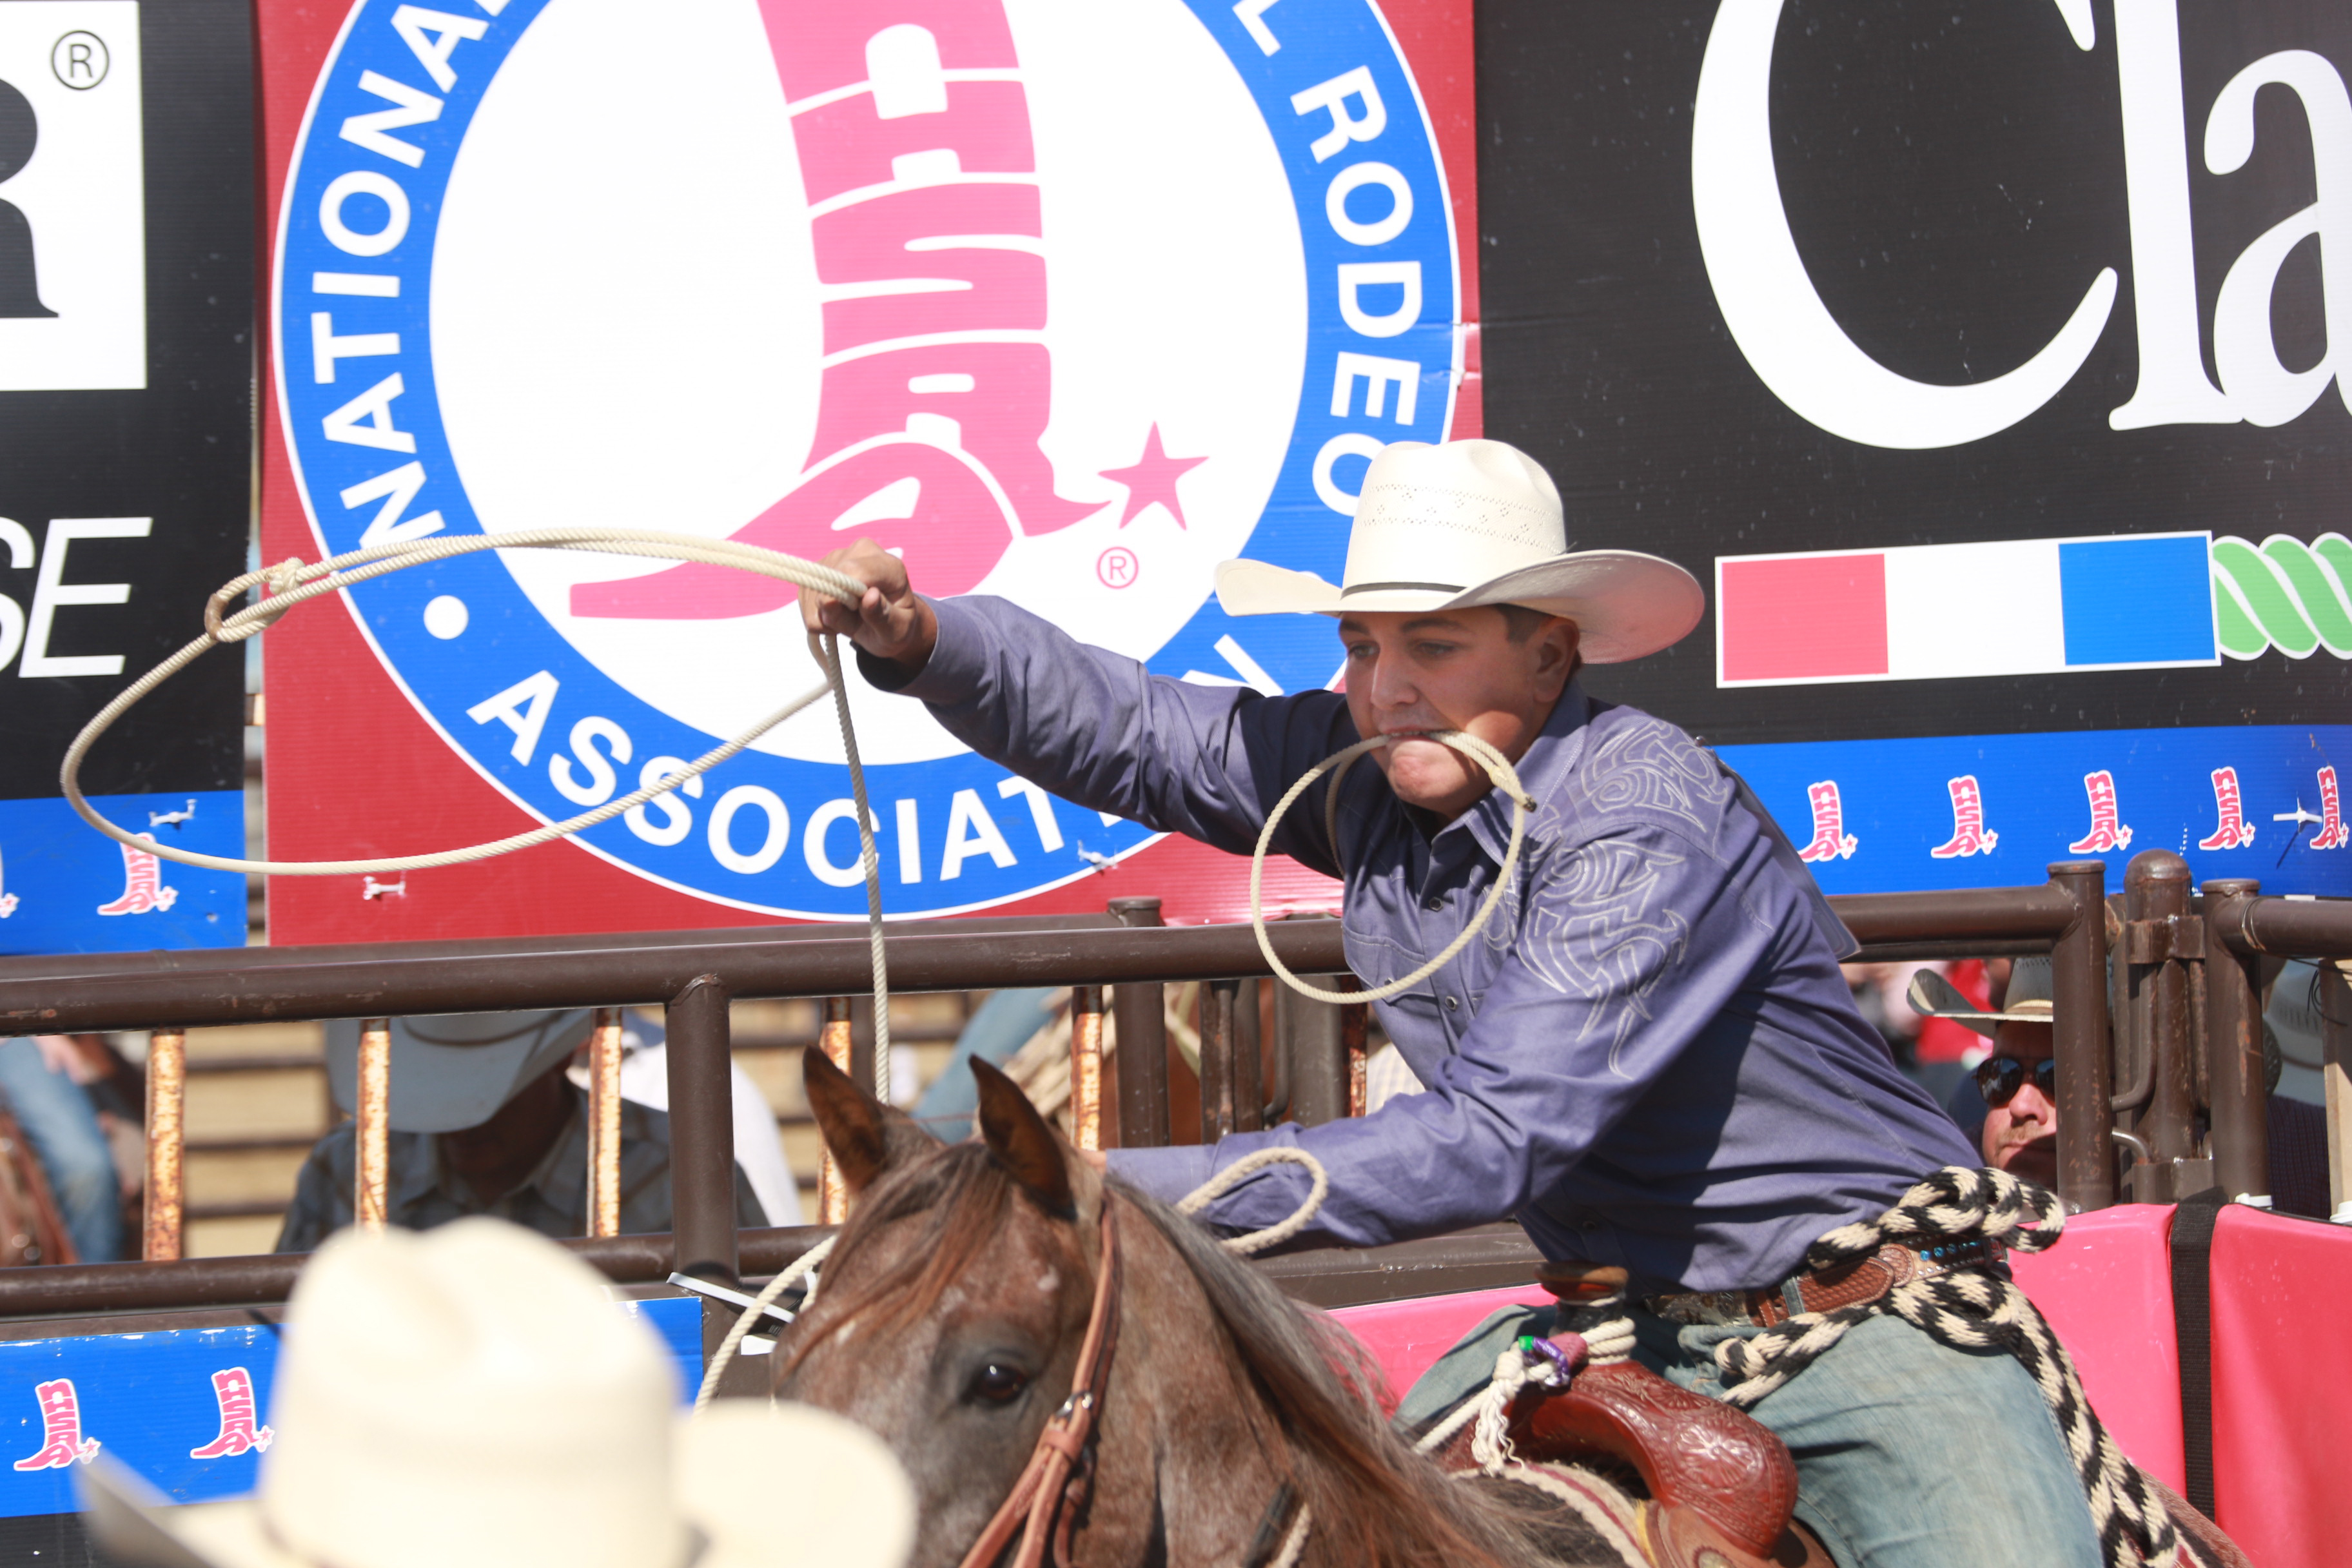 This past year, 16-year-old Dylan Cook, a Camden homeschooled student, placed eighth in the world in calf roping at the National High School Rodeo Finals in Rock Springs, Wyoming. Dylan, who has been competing in rodeo since fourth grade, rides one of two horses — D.K. for team roping and Nala for calf roping. This past year he competed in the National High School Rodeo Finals against rodeo athletes not only from the United States but also from Mexico, Australia, and Canada. 